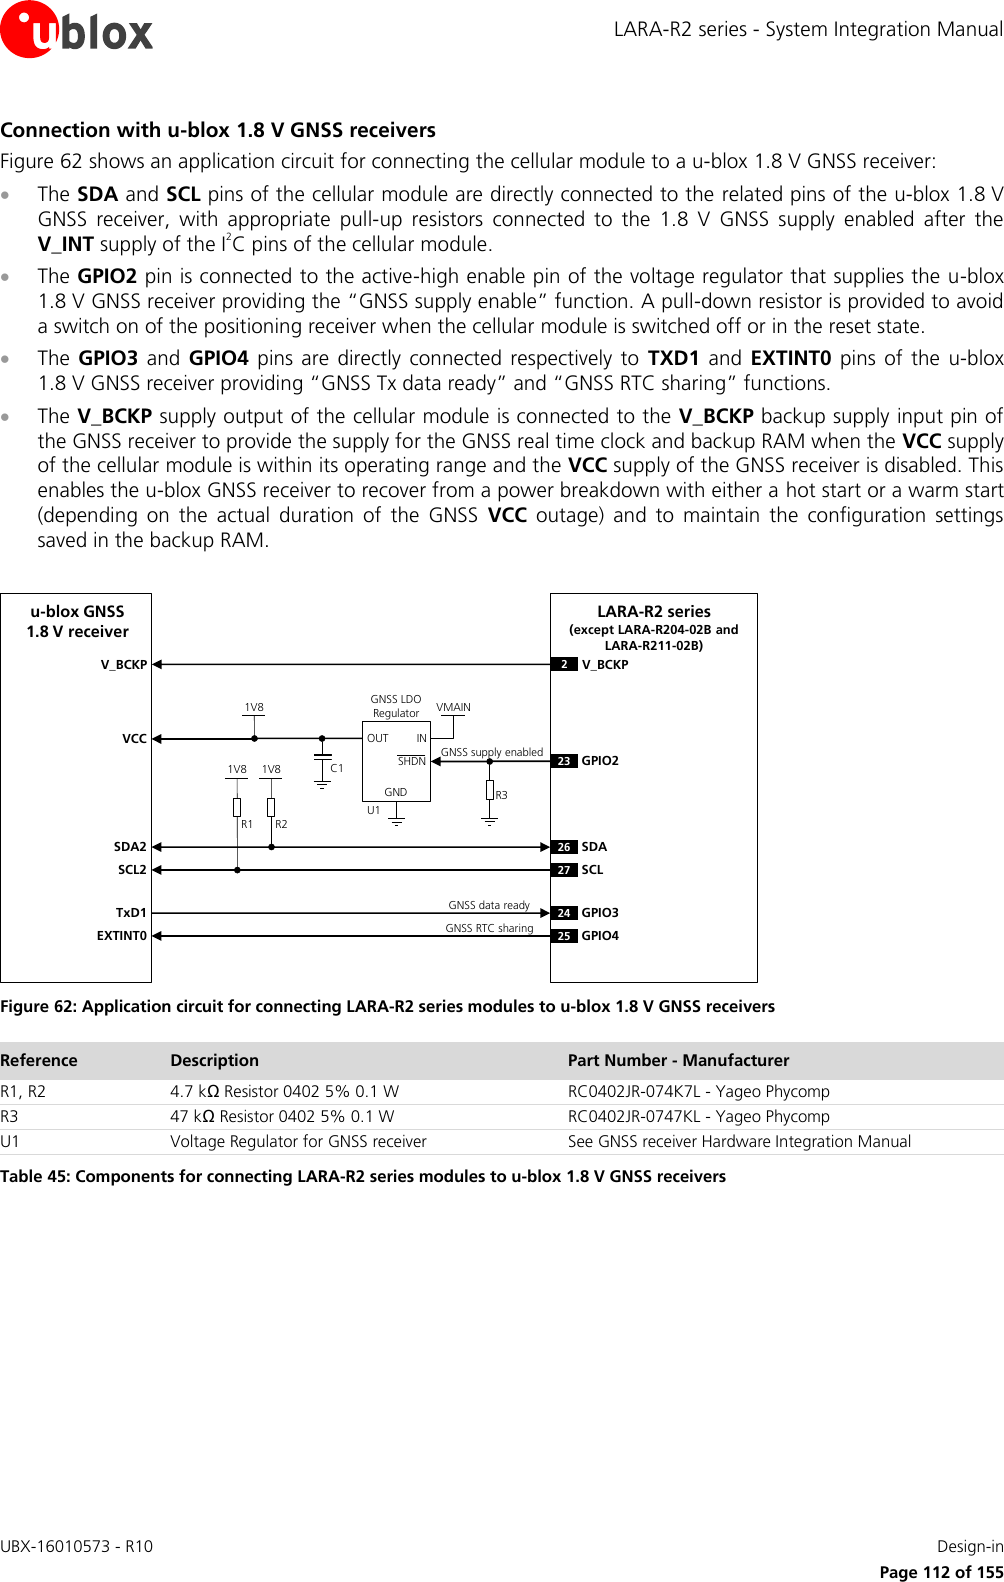 LARA-R2 series - System Integration Manual UBX-16010573 - R10    Design-in     Page 112 of 155 Connection with u-blox 1.8 V GNSS receivers Figure 62 shows an application circuit for connecting the cellular module to a u-blox 1.8 V GNSS receiver:  The SDA and SCL pins of the cellular module are directly connected to the related pins of the u-blox 1.8 V GNSS  receiver,  with  appropriate  pull-up  resistors  connected  to  the  1.8  V  GNSS  supply  enabled  after  the V_INT supply of the I2C pins of the cellular module.  The GPIO2 pin is connected to the active-high enable pin of the voltage regulator that supplies the u-blox 1.8 V GNSS receiver providing the “GNSS supply enable” function. A pull-down resistor is provided to avoid a switch on of the positioning receiver when the cellular module is switched off or in the reset state.  The  GPIO3  and GPIO4  pins  are  directly  connected  respectively  to  TXD1  and  EXTINT0  pins  of  the  u-blox 1.8 V GNSS receiver providing “GNSS Tx data ready” and “GNSS RTC sharing” functions.  The V_BCKP supply output of the cellular module is connected to the V_BCKP backup supply input pin of the GNSS receiver to provide the supply for the GNSS real time clock and backup RAM when the VCC supply of the cellular module is within its operating range and the VCC supply of the GNSS receiver is disabled. This enables the u-blox GNSS receiver to recover from a power breakdown with either a hot start or a warm start (depending  on  the  actual  duration  of  the  GNSS  VCC  outage)  and  to  maintain  the  configuration  settings saved in the backup RAM.  R1INOUTGNDGNSS LDORegulatorSHDNu-blox GNSS1.8 V receiverSDA2SCL2R21V8 1V8VMAIN1V8U123 GPIO2SDASCLC1TxD1EXTINT0GPIO3GPIO426272425VCCR3V_BCKP V_BCKP2GNSS data readyGNSS RTC sharingGNSS supply enabledLARA-R2 series(except LARA-R204-02B and LARA-R211-02B) Figure 62: Application circuit for connecting LARA-R2 series modules to u-blox 1.8 V GNSS receivers Reference Description Part Number - Manufacturer R1, R2 4.7 kΩ Resistor 0402 5% 0.1 W  RC0402JR-074K7L - Yageo Phycomp R3 47 kΩ Resistor 0402 5% 0.1 W  RC0402JR-0747KL - Yageo Phycomp U1 Voltage Regulator for GNSS receiver See GNSS receiver Hardware Integration Manual Table 45: Components for connecting LARA-R2 series modules to u-blox 1.8 V GNSS receivers  